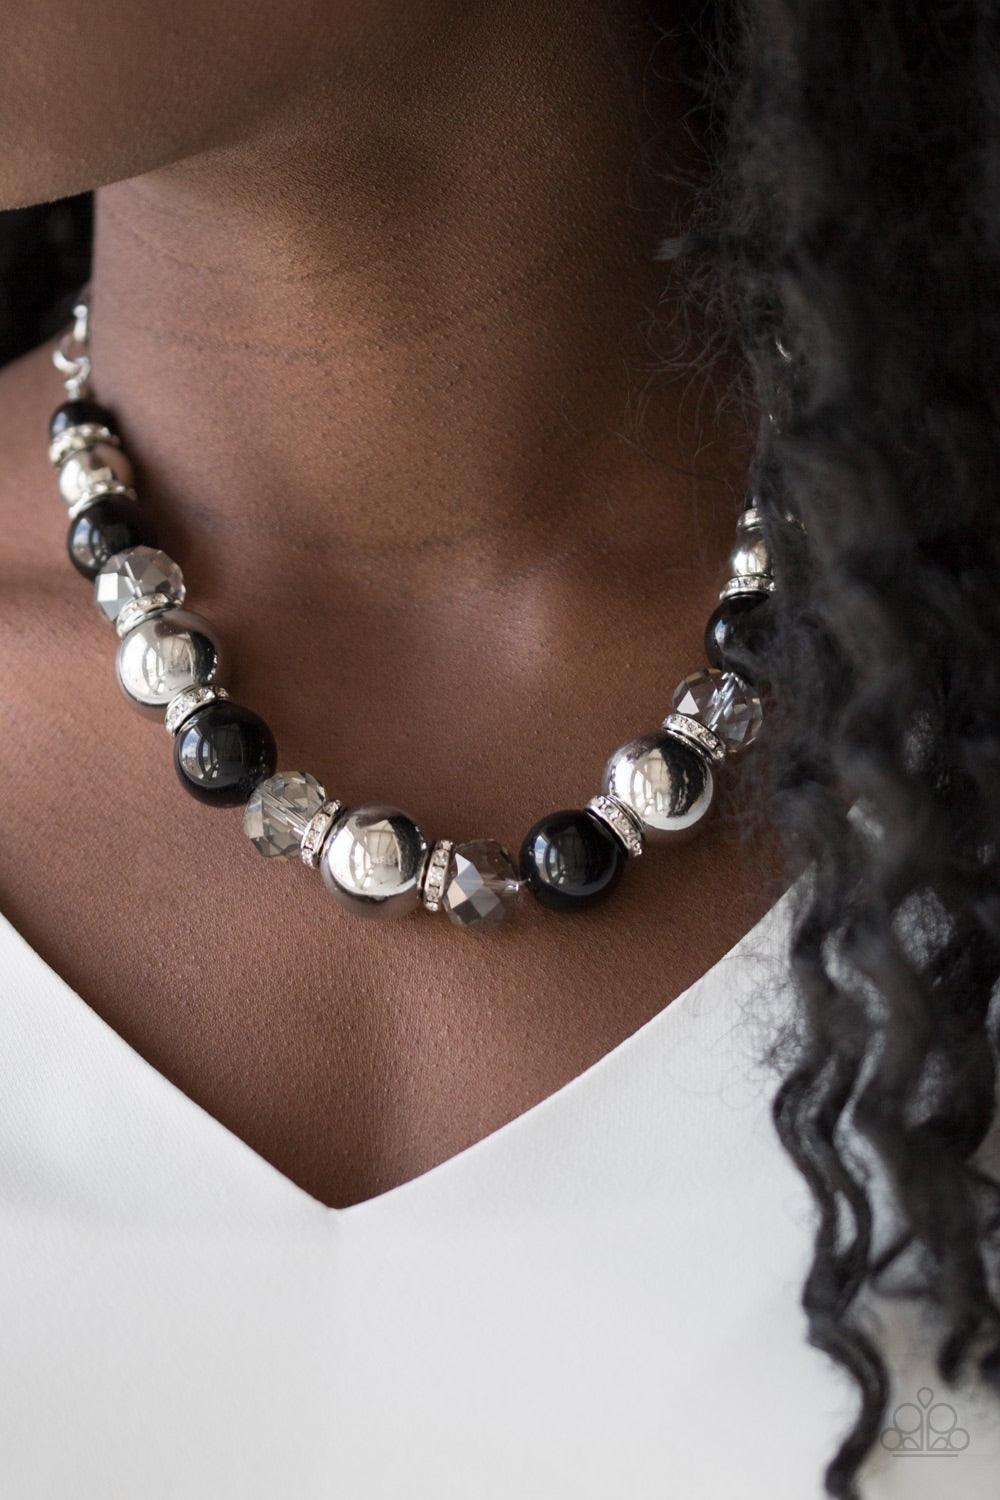 Paparazzi Accessories The Camera Never Lies - Black Oversized silver, smoky crystal-like, and polished black beads are threaded along an invisible wire below the collar for a glamorous look. White rhinestone encrusted rings are sprinkled between the drama